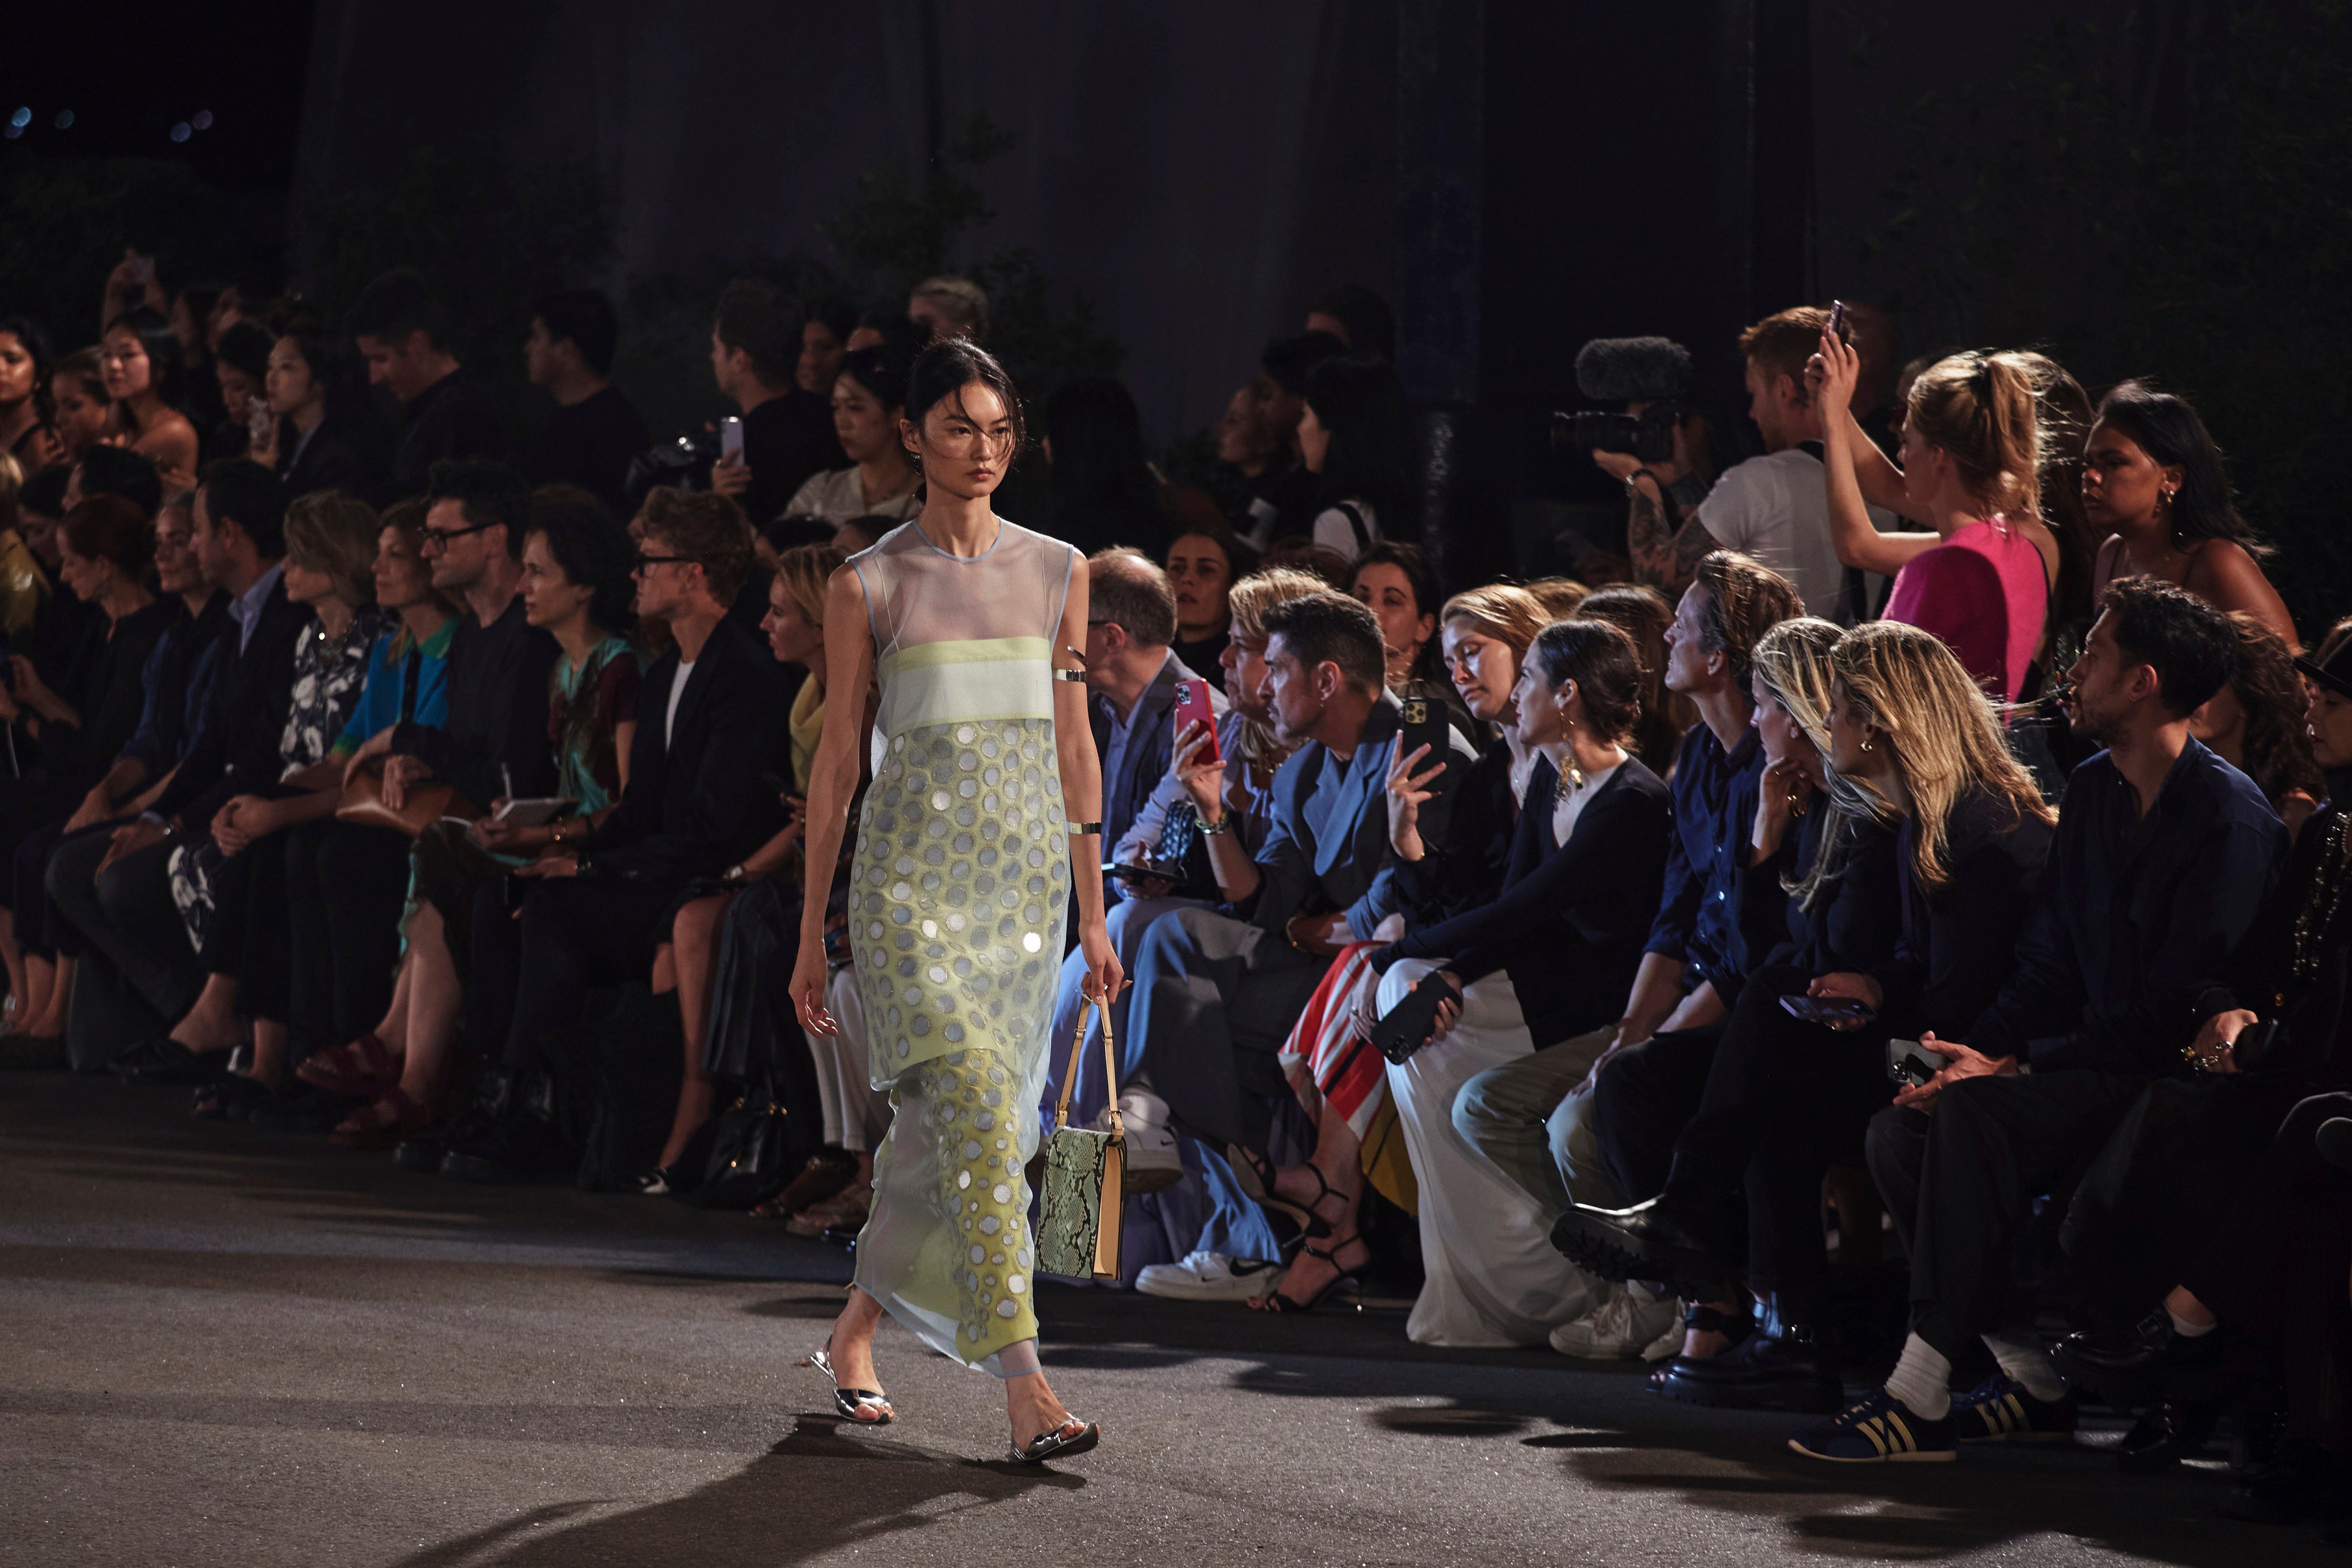 New York Fashion Week: Tory Burch went for 90s glamour over its usual  colourful prints, while Gabriela Hearst, also creative director of Chloé,  brought an activist-forward show for spring/summer 2023